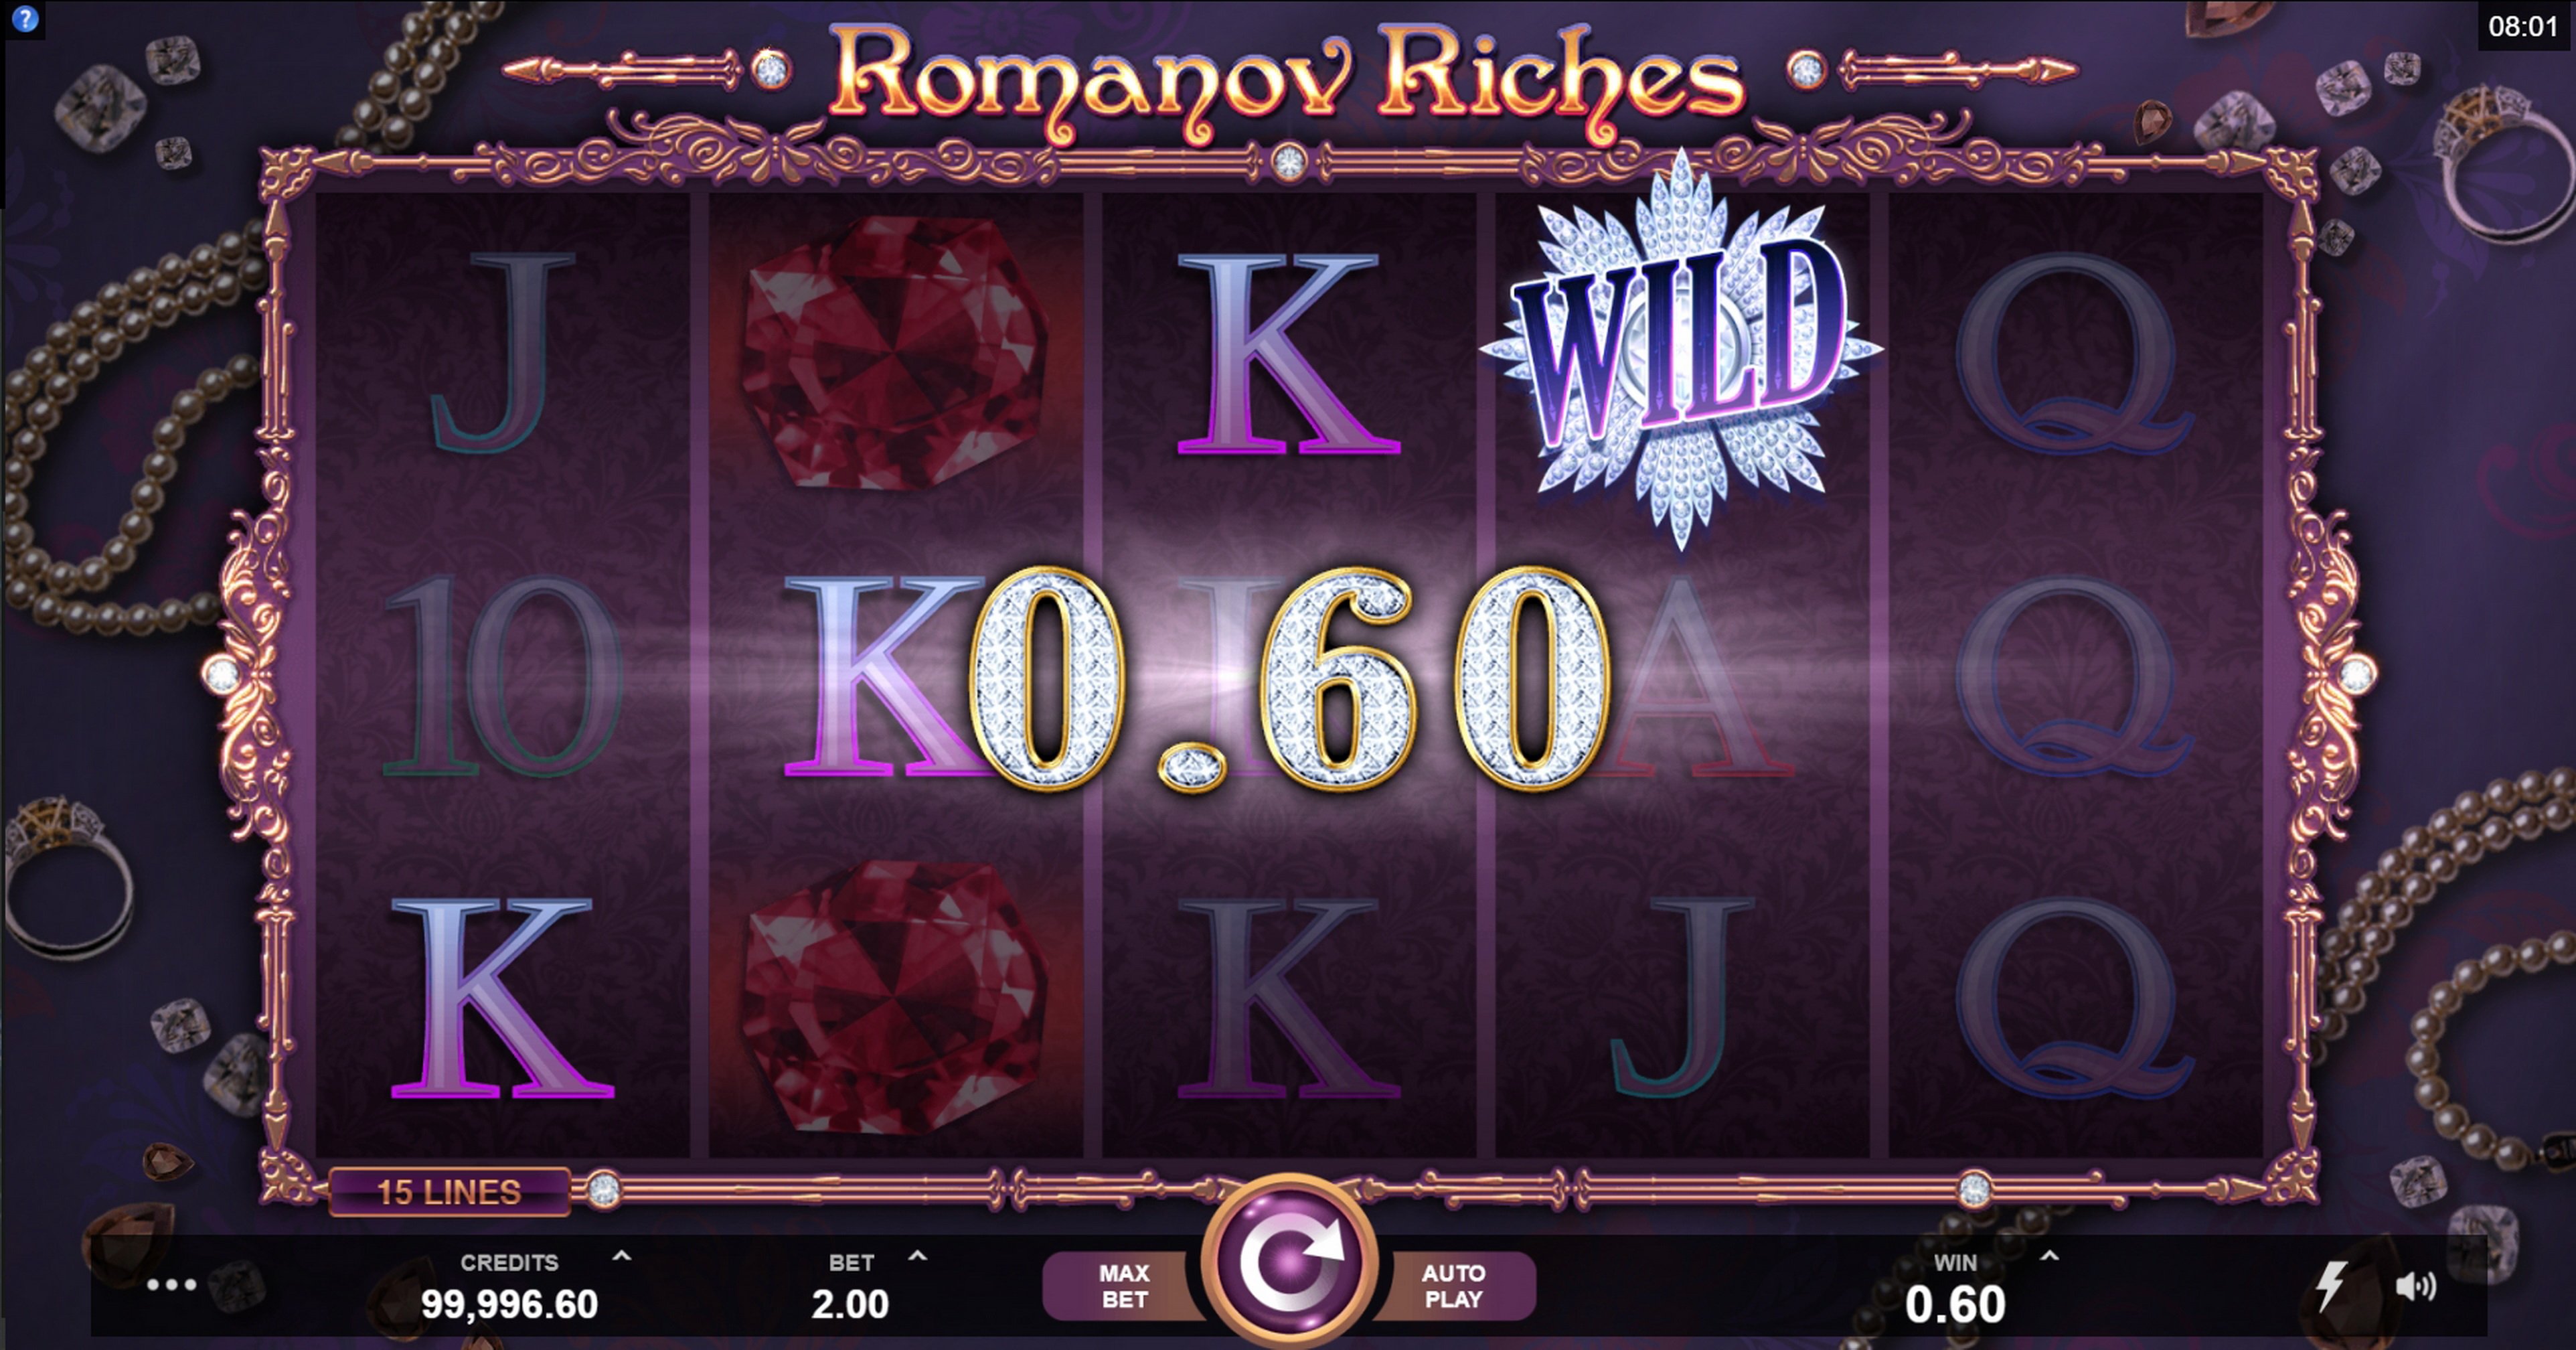 Win Money in Romanov Riches Free Slot Game by Fortune Factory Studios